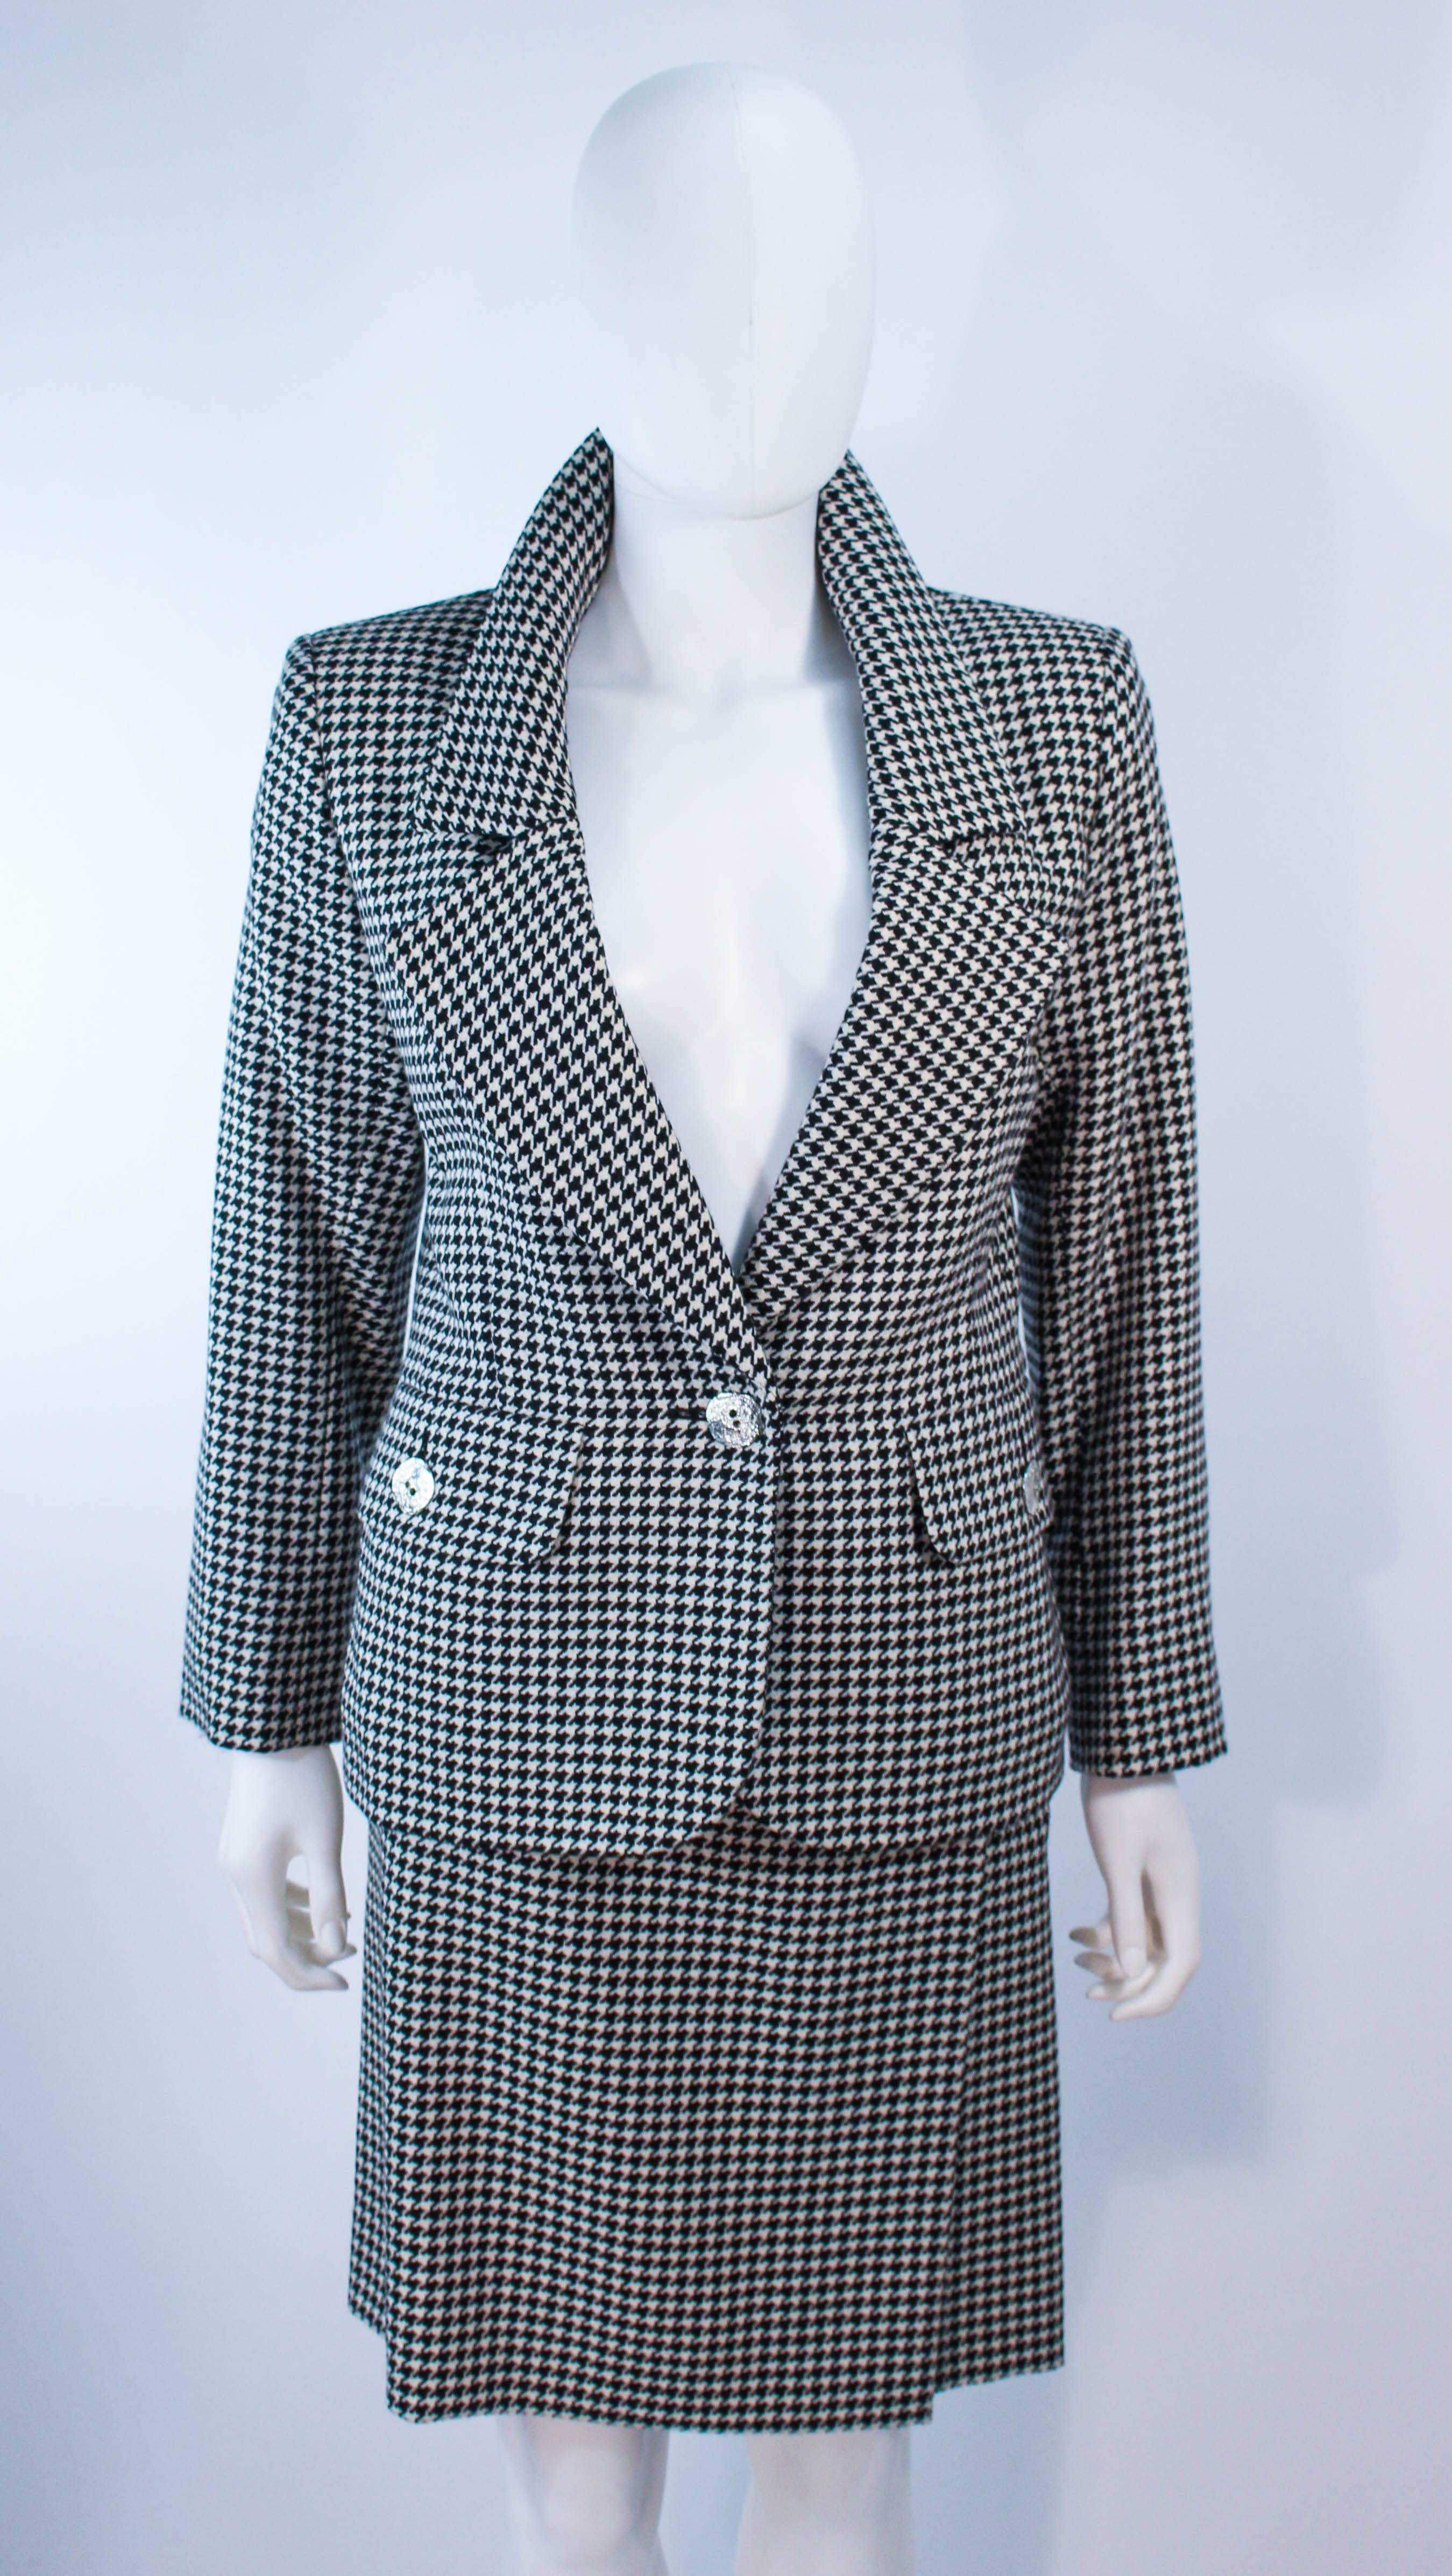 This Yves Saint Laurent skirt suit is composed of a black and white houndstooth wool. The jacket features a center front button closure. The skirt has a zipper closure. In excellent vintage condition.

**Please cross-reference measurements for